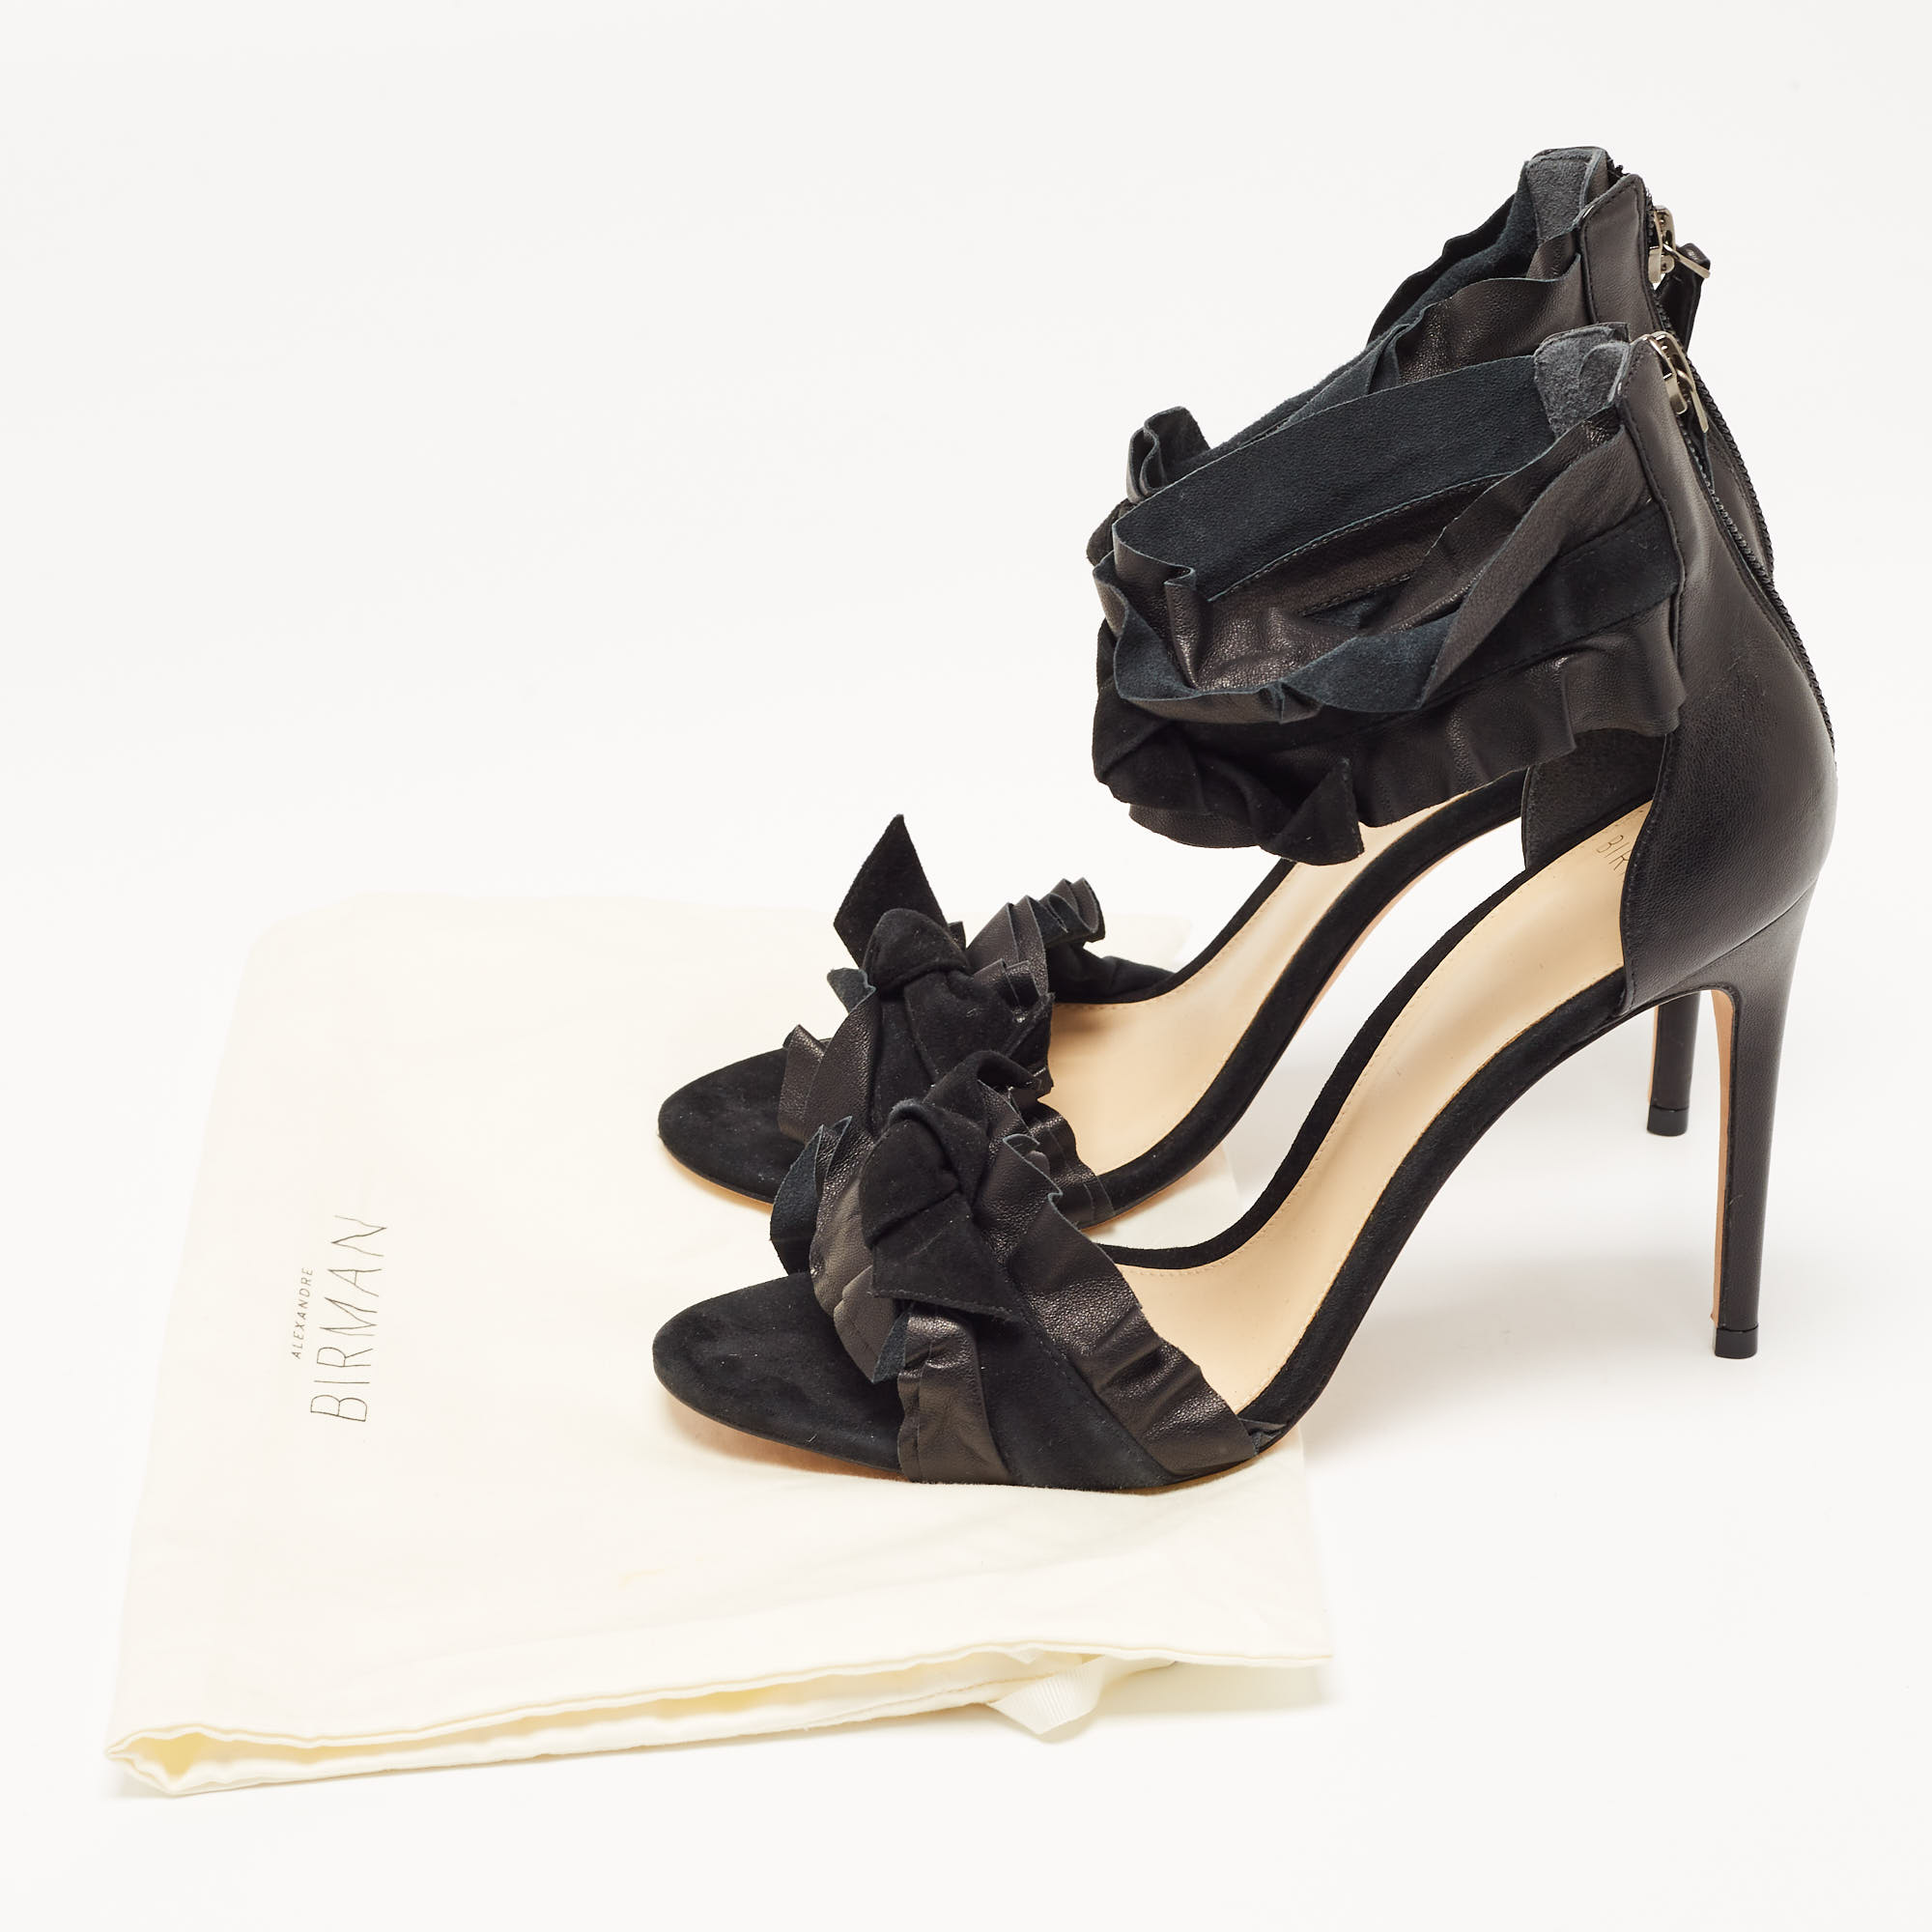 Alexandre Birman Black Leather And Suede Ruffle Ankle Wrap Sandals Size 38